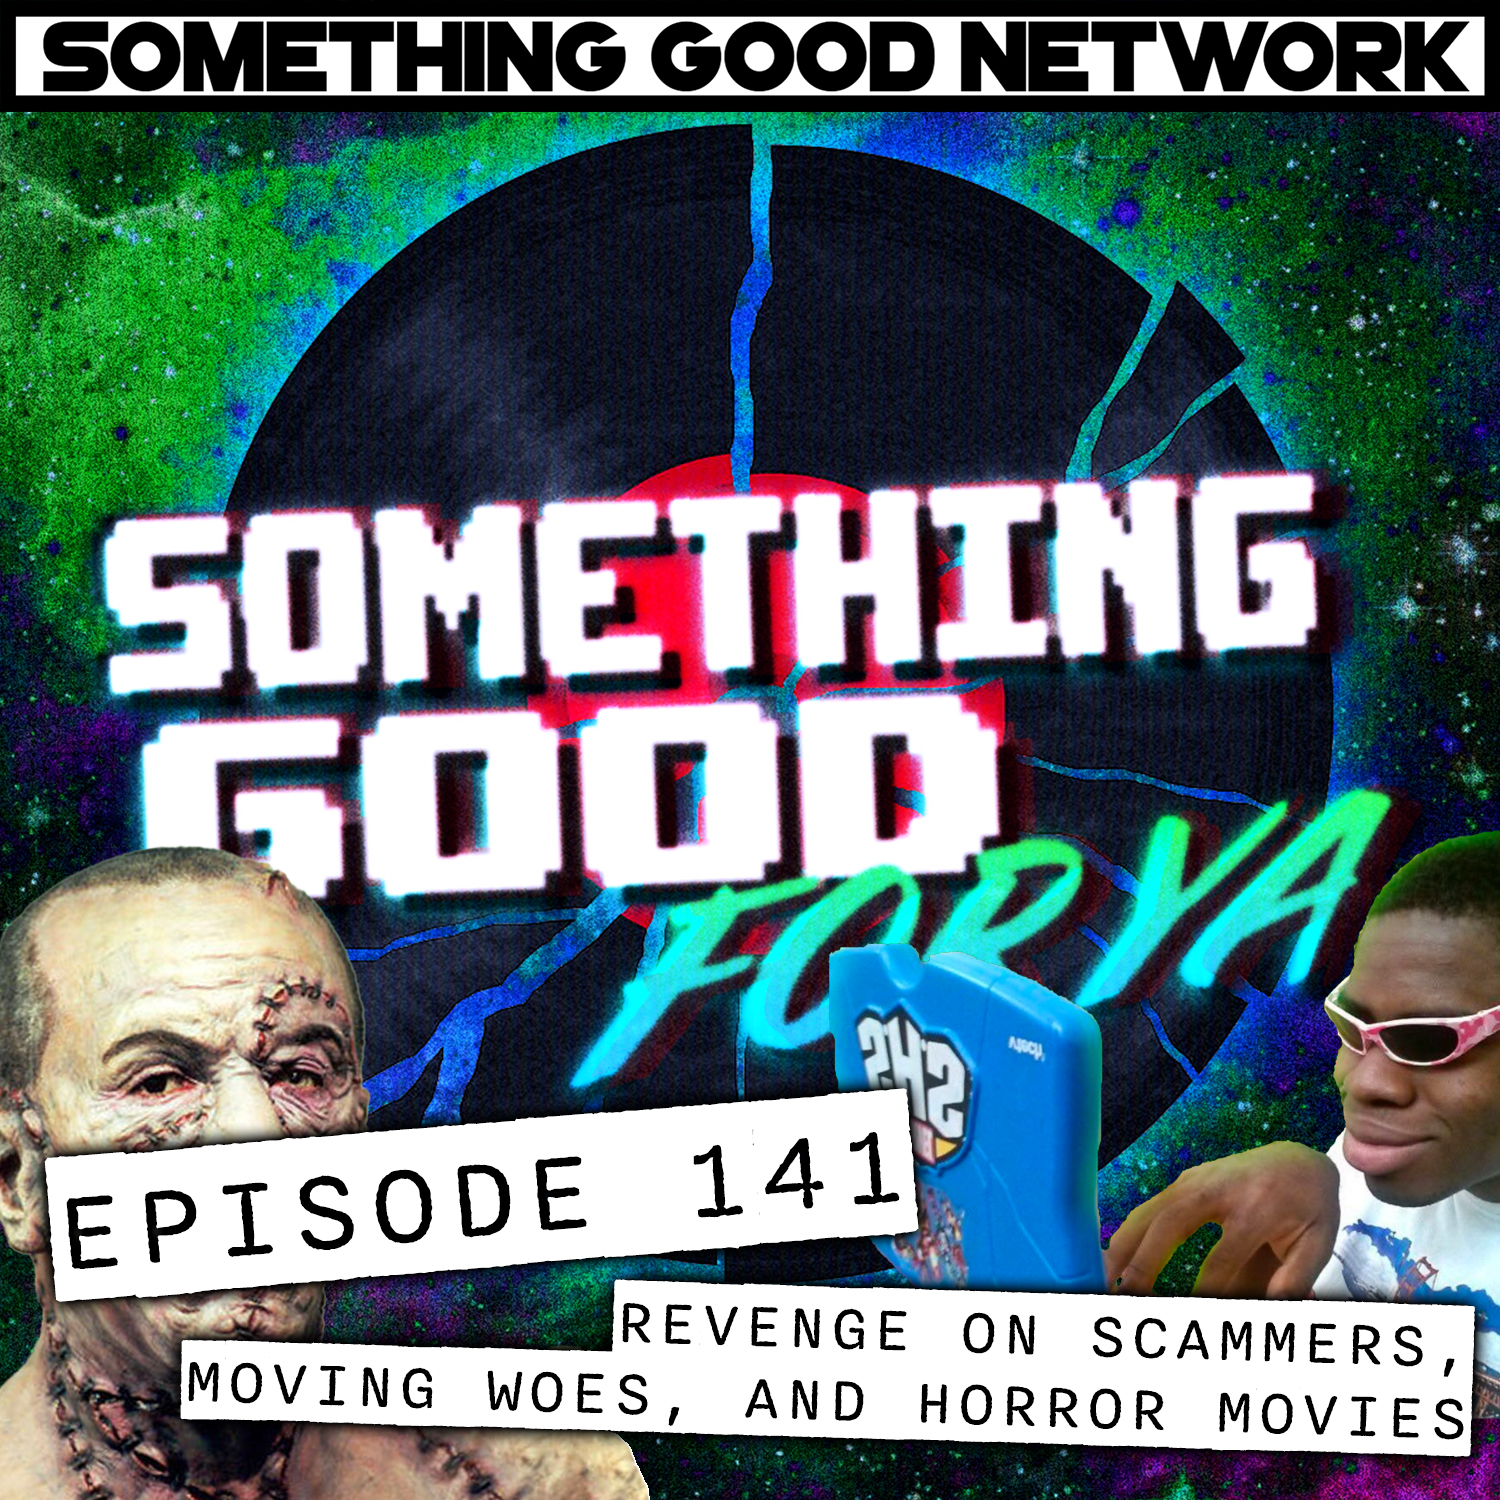 Episode 141 - Revenge on Scammers, Moving Woes, and Horror Movies hero artwork